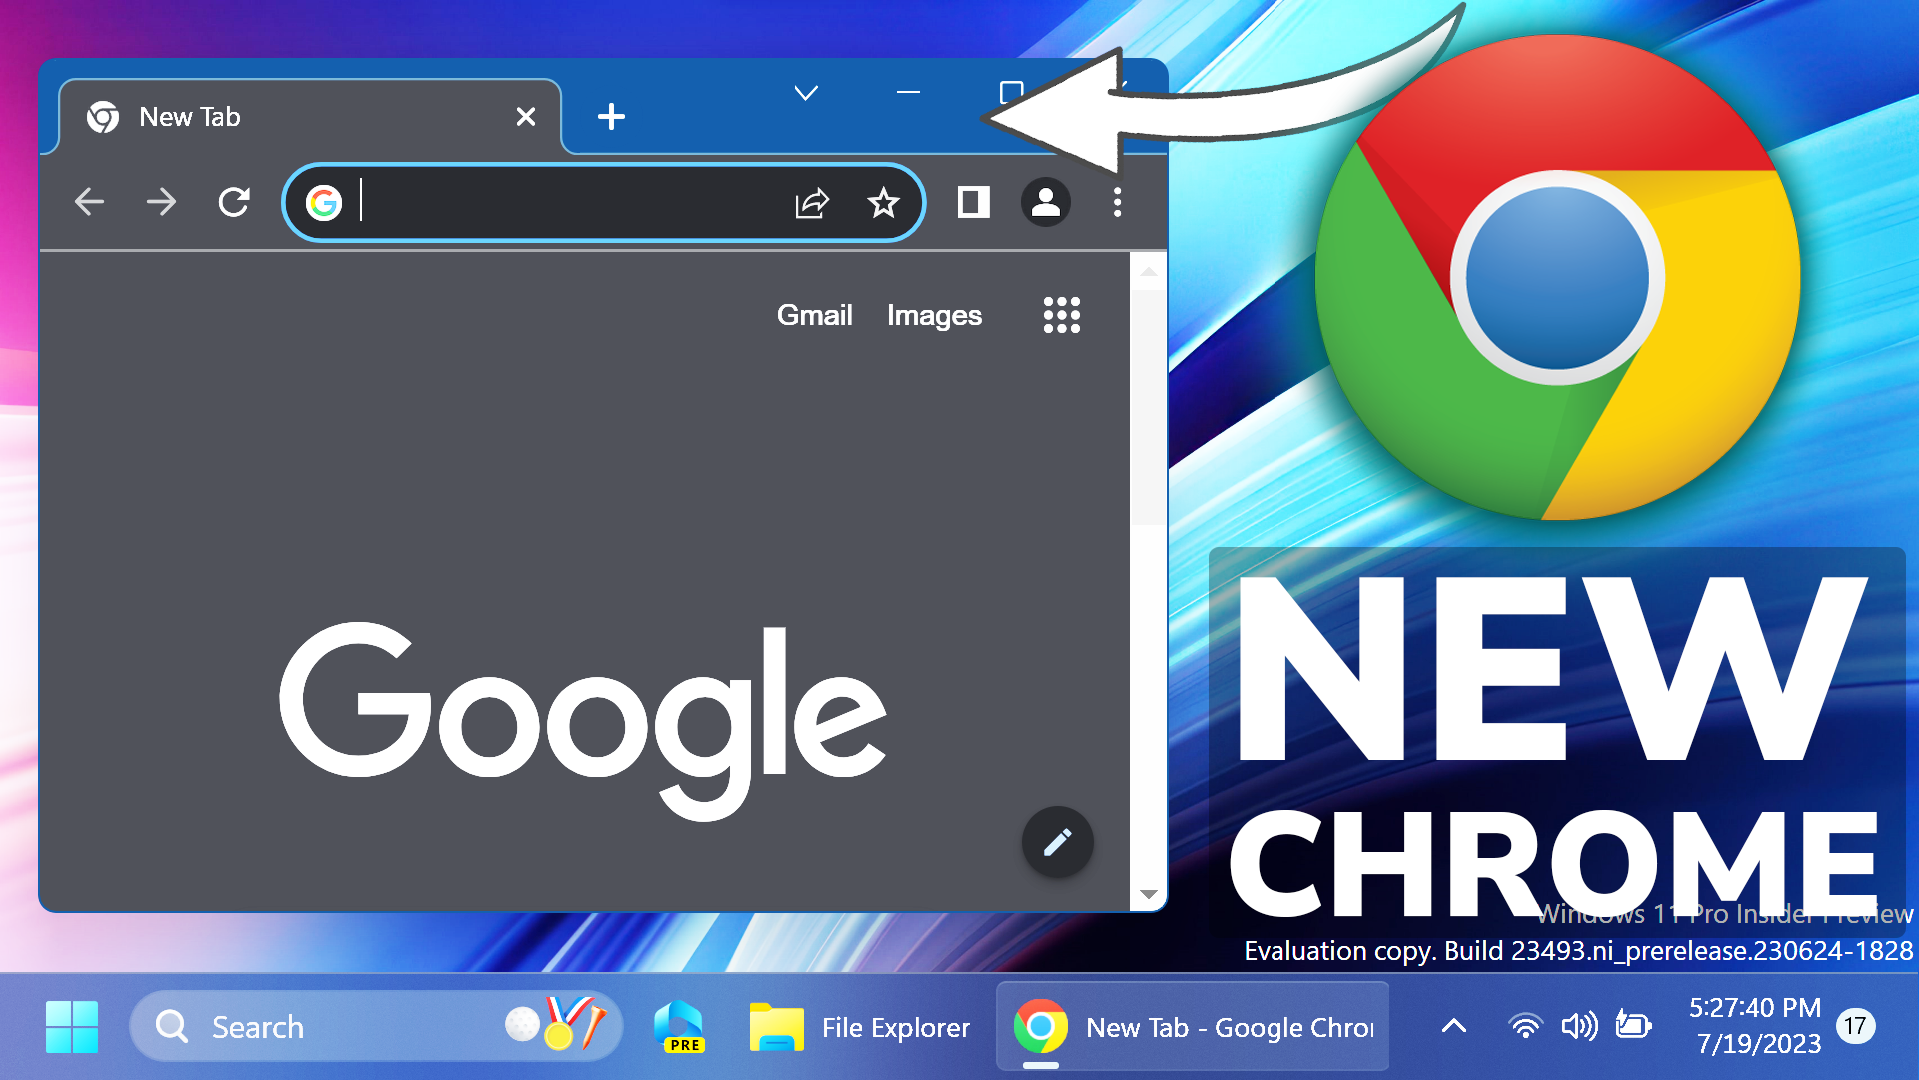 New Chrome Update With Windows 11 Design Mica Effect Tech Based